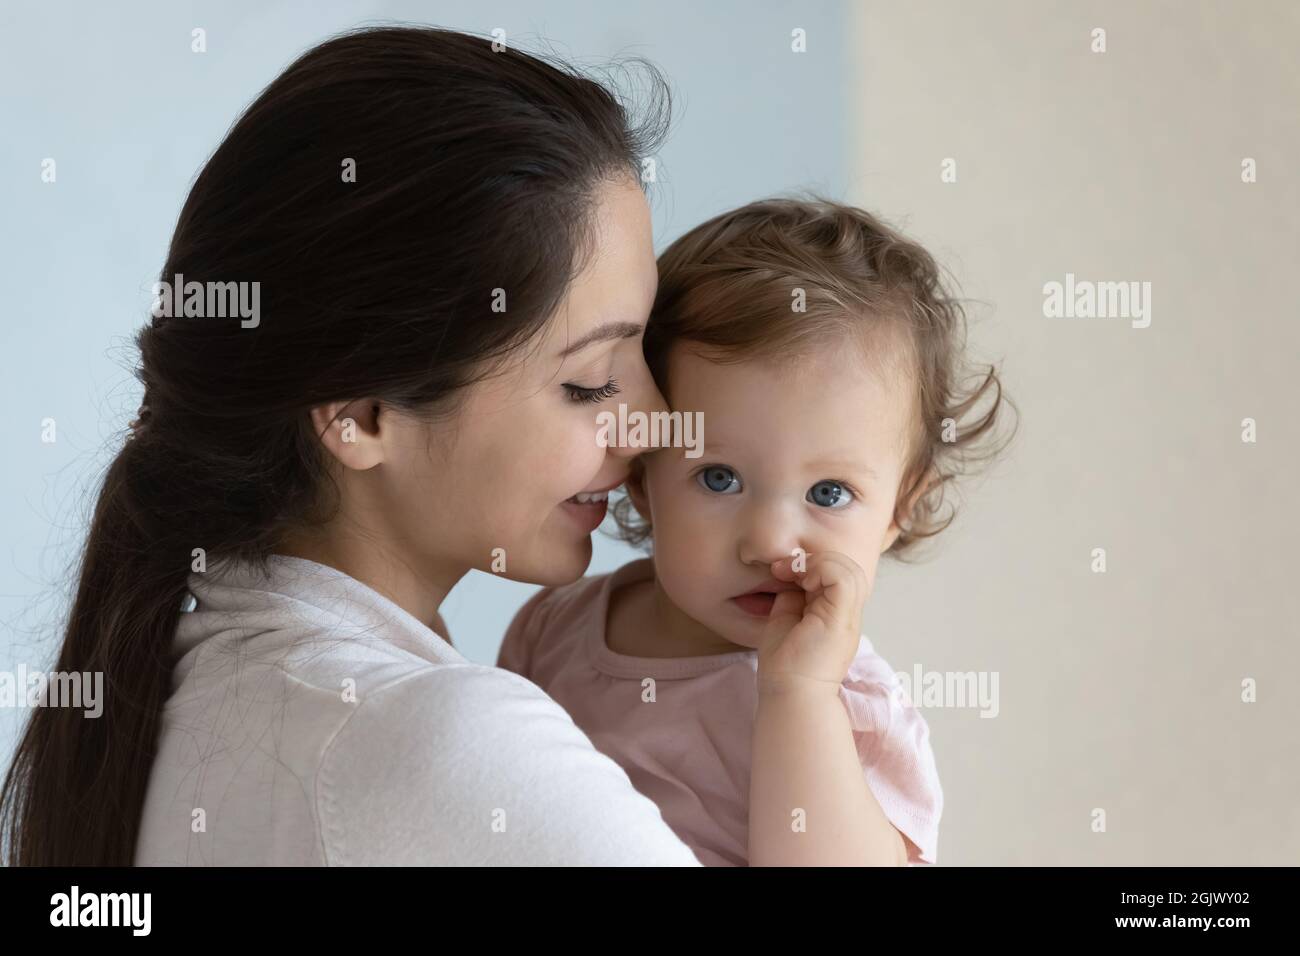 Happy new mom holding cute toddler baby in arms, smiling Stock Photo